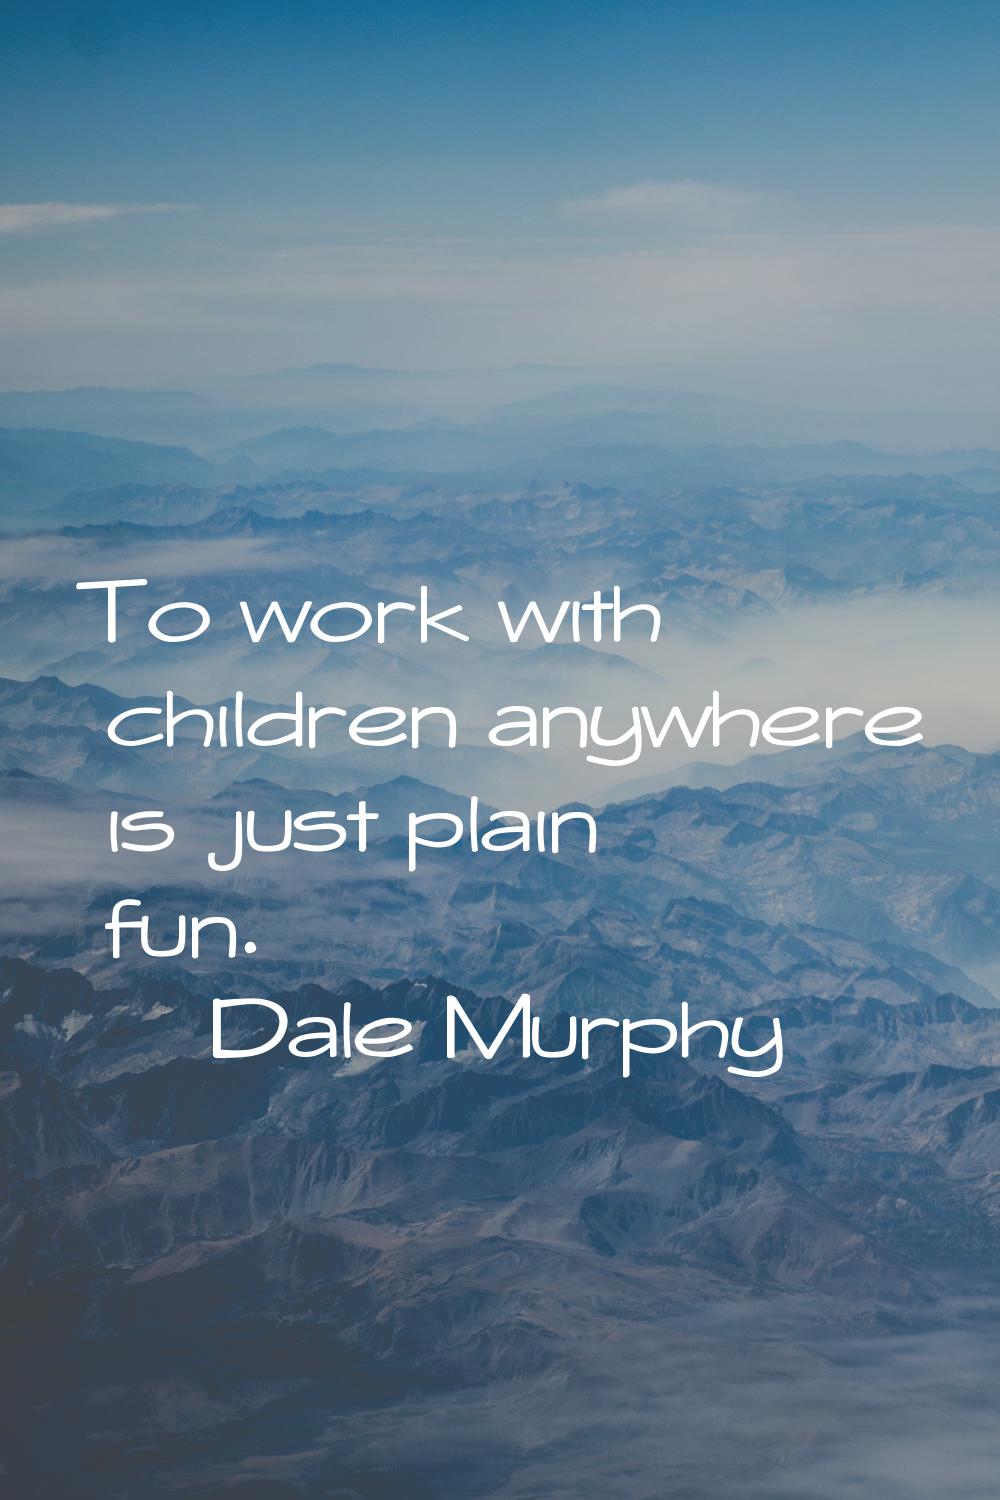 To work with children anywhere is just plain fun.